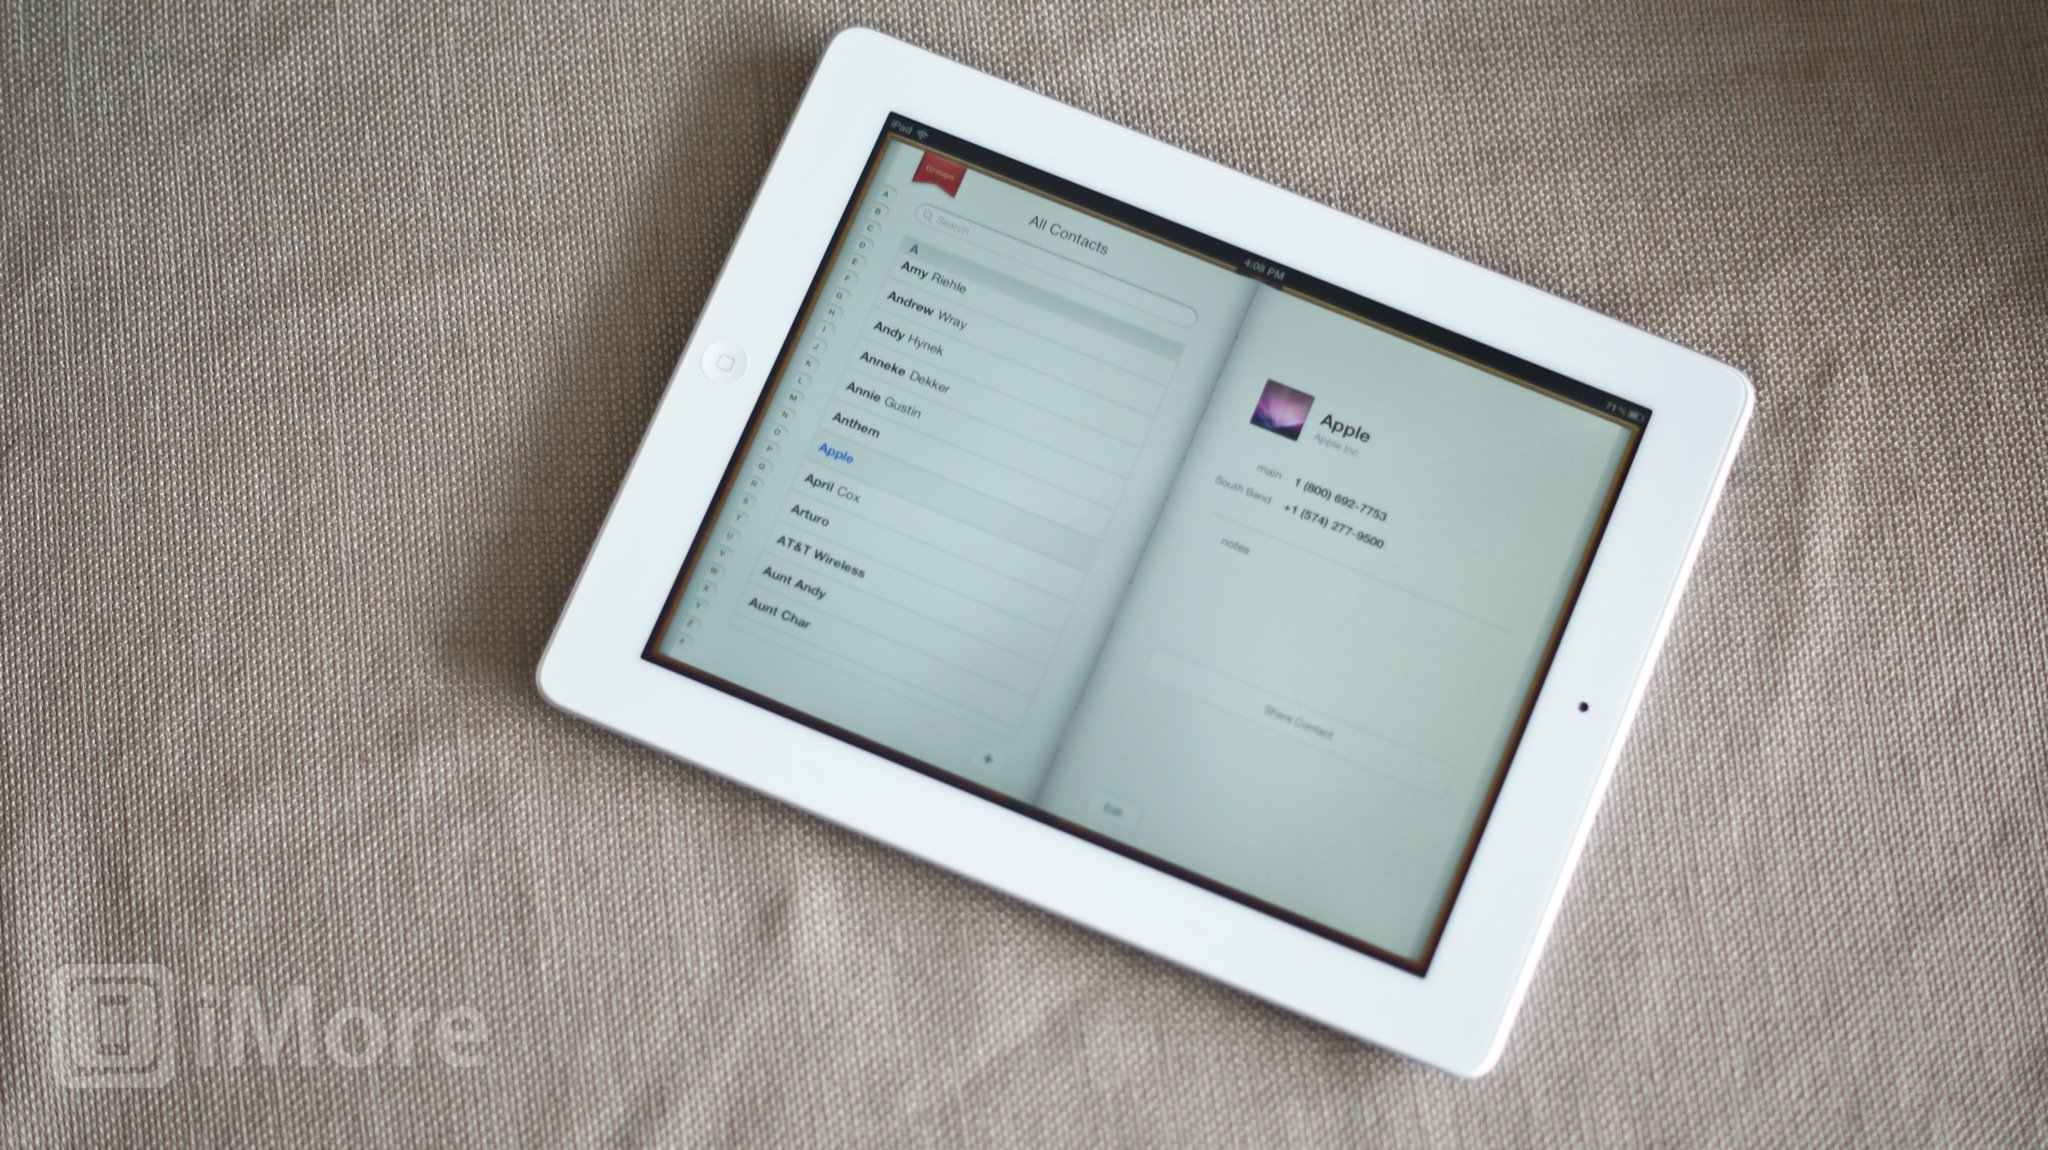 How to create edit and share contacts on your new iPad